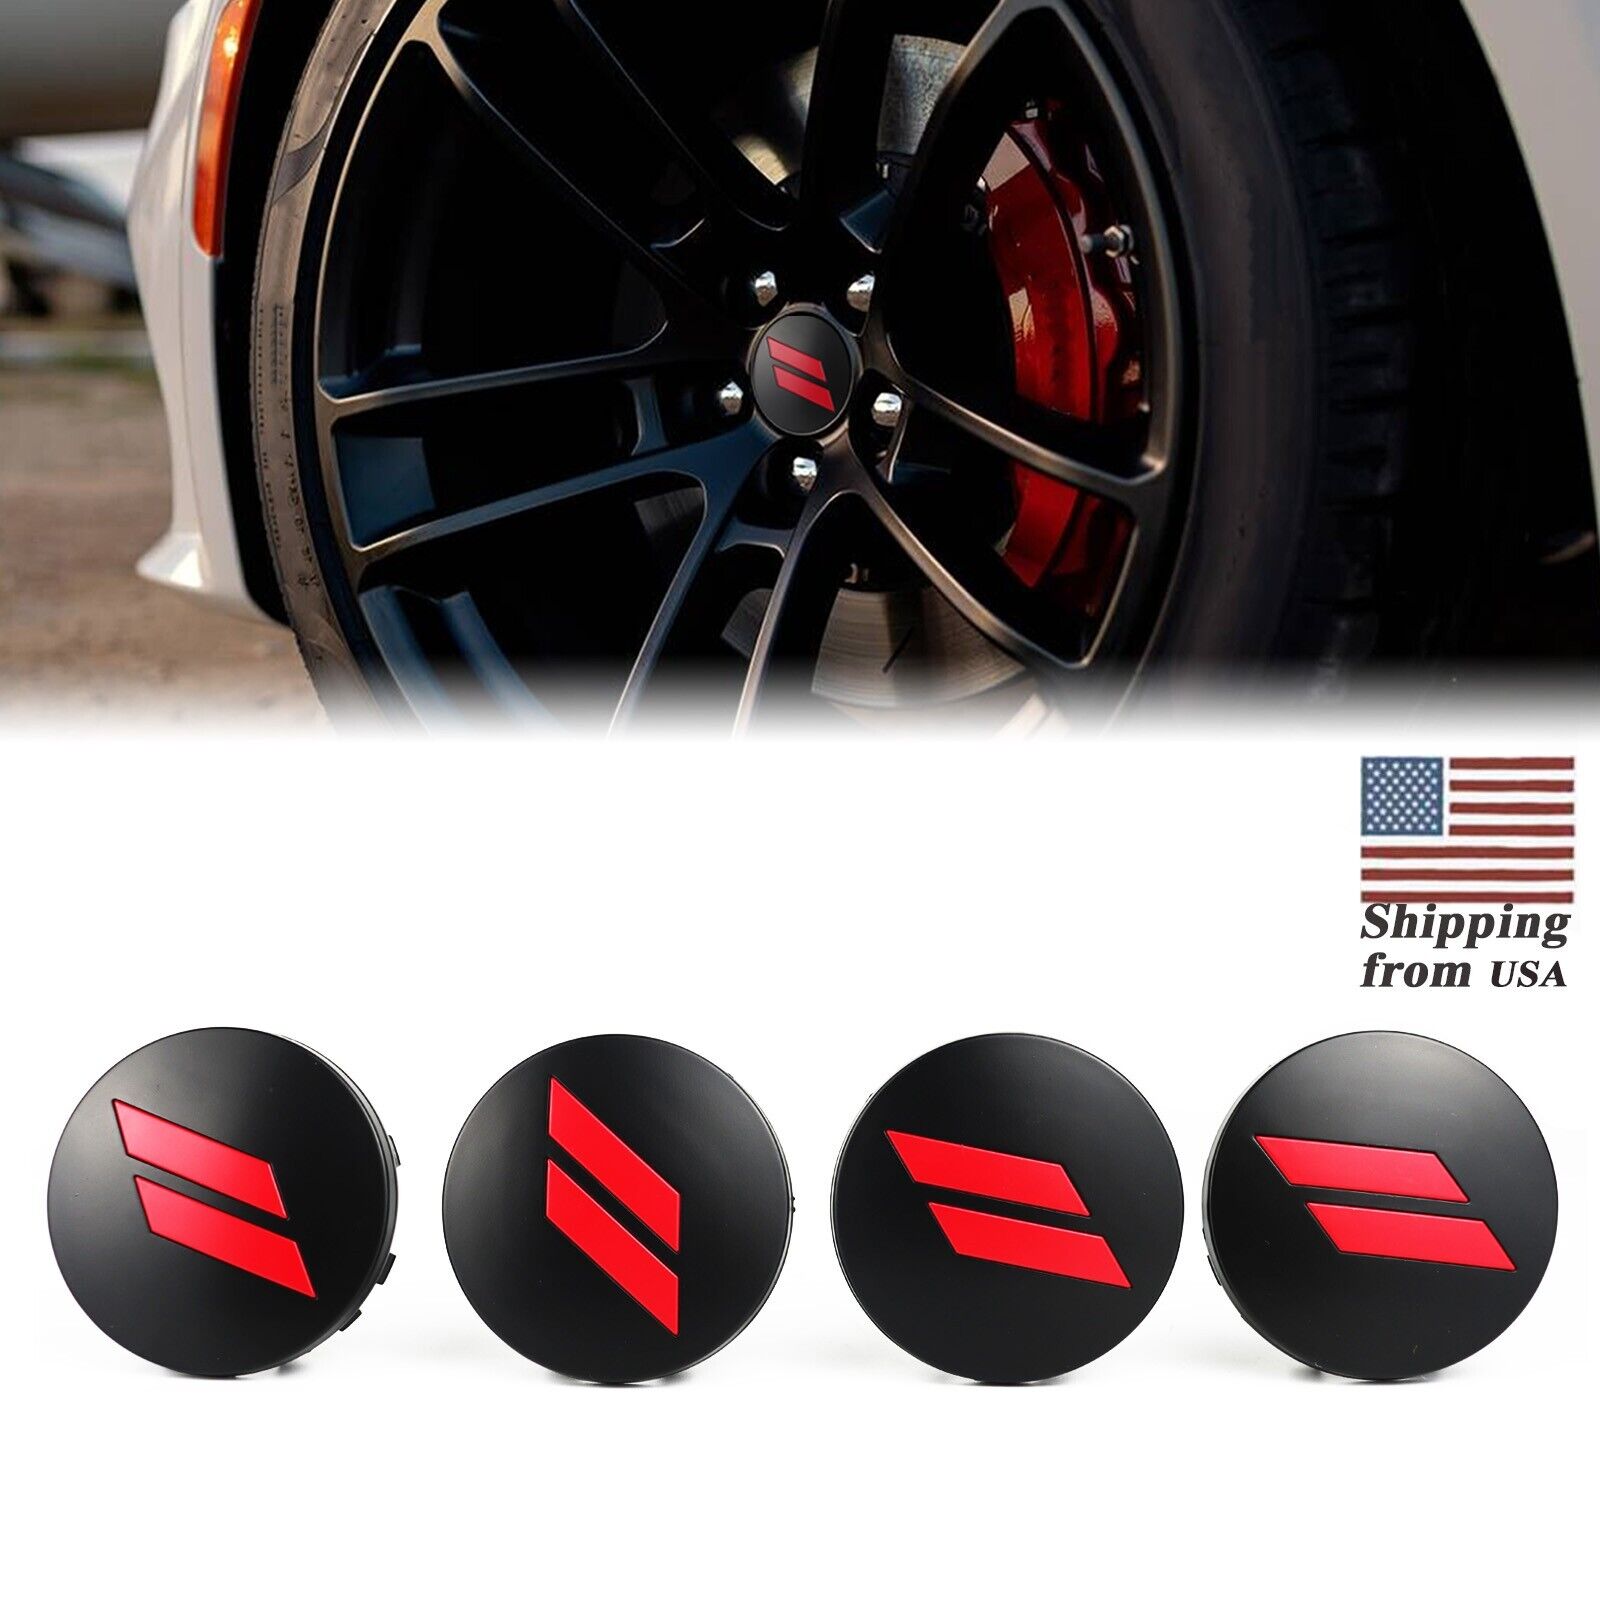 4PCS Wheel Hub Center Cap Cover for Dodge Charger Challenger Durango 63mm Red